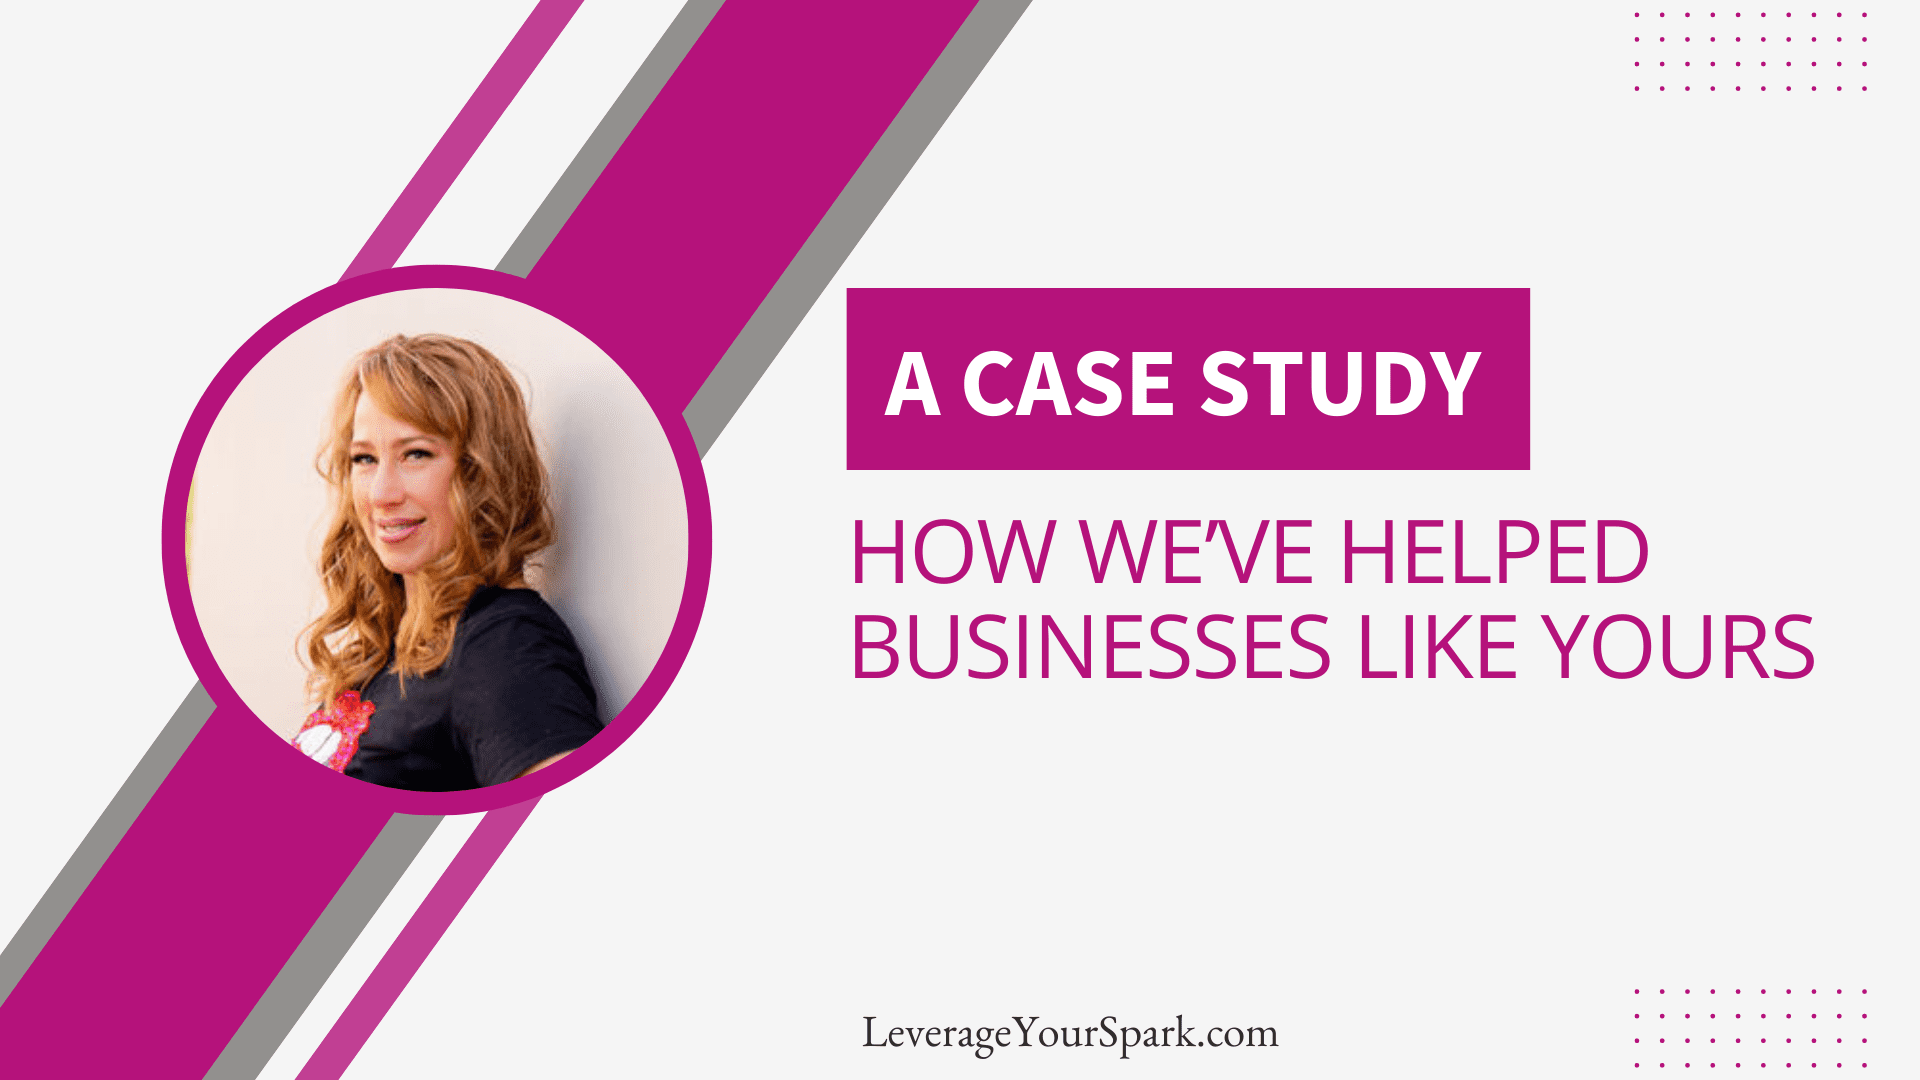 CASE STUDY: HOW WE’VE HELPED BUSINESSES LIKE YOURS